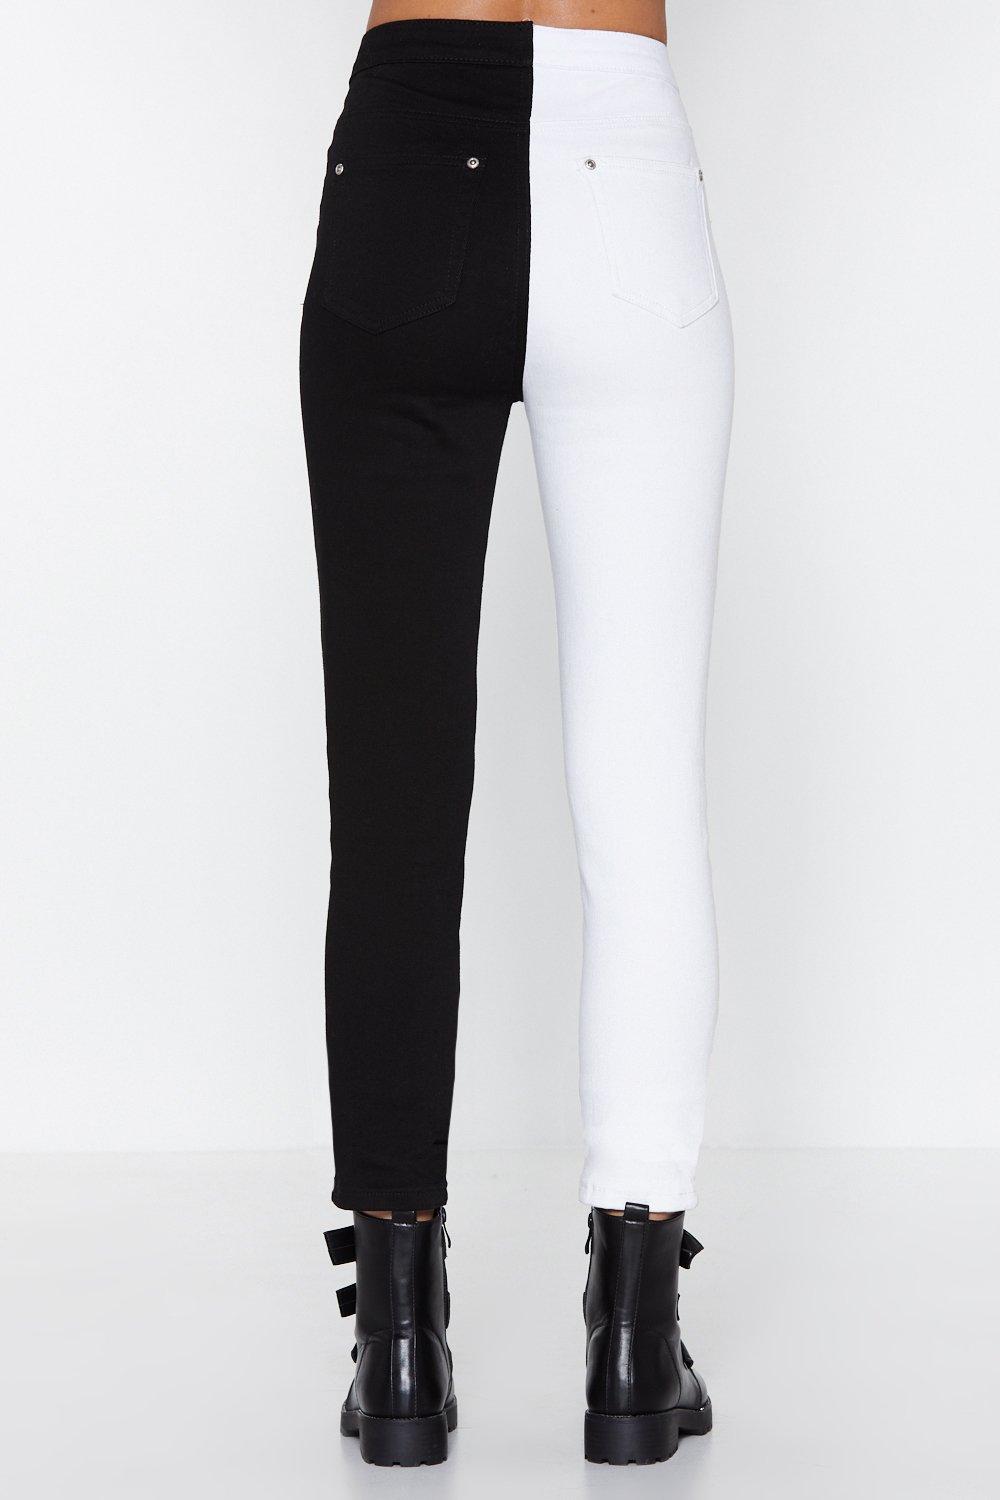 white and black jeans